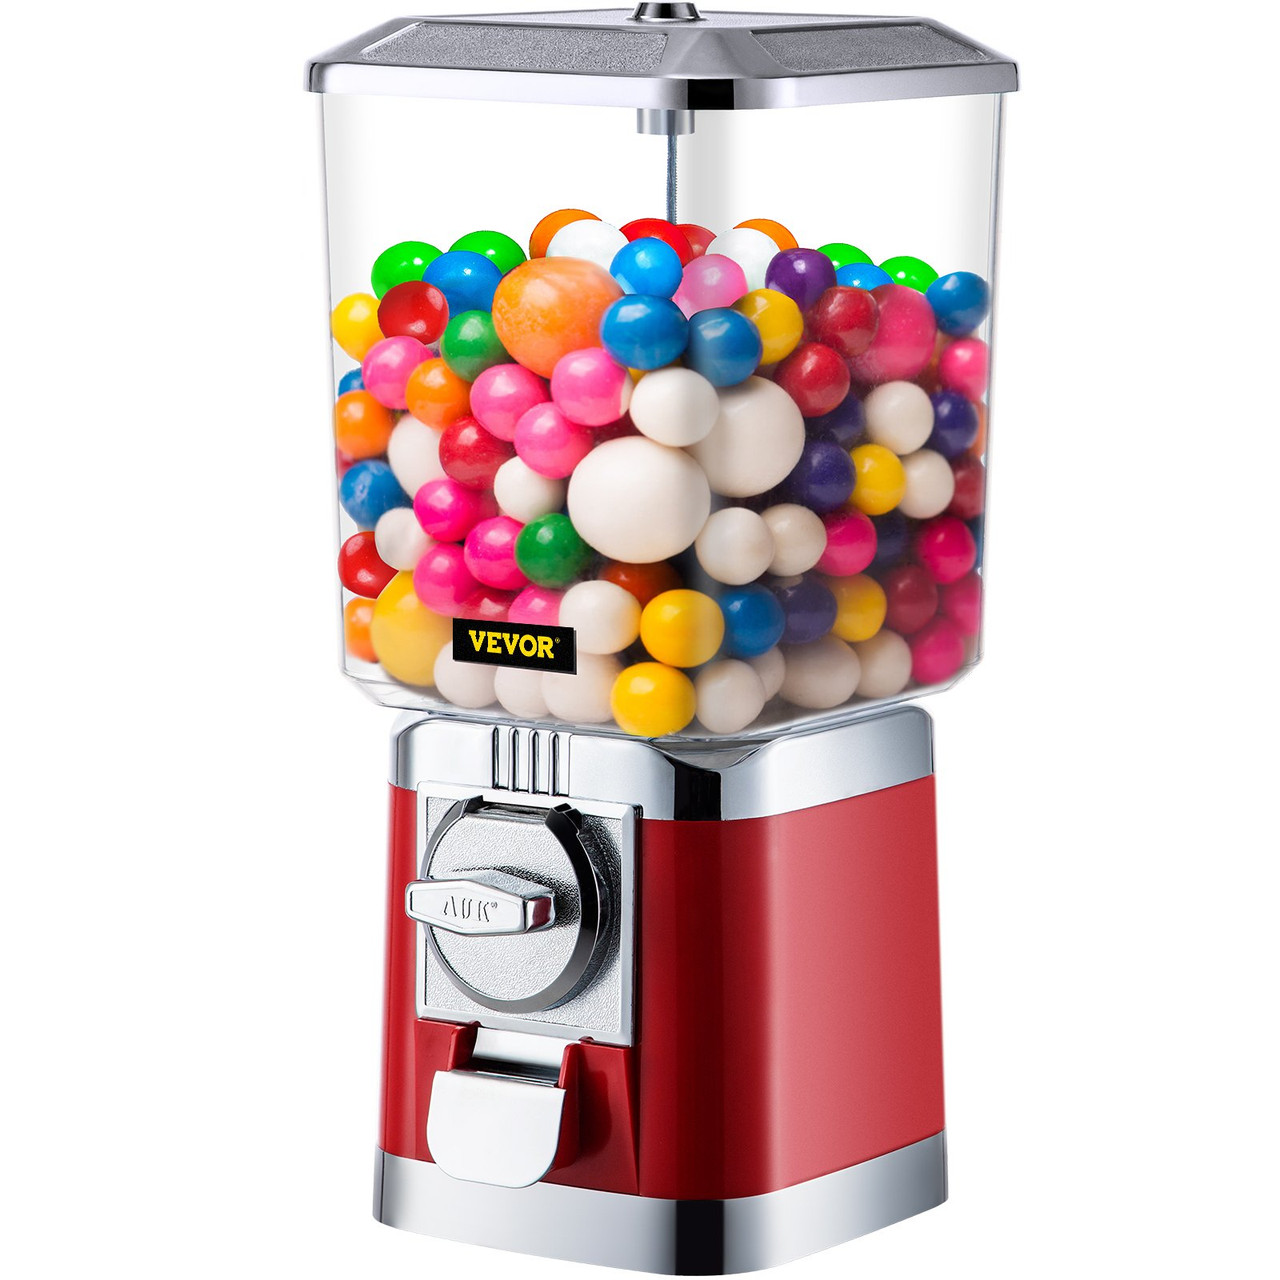 Vending Machine, Classic Gumball Bank, Huge Load Capacity Candy Gumball Machine, Mini Vending Machines, Gumball Dispenser Machine for Kids, Perfect for Birthdays, Christmas and Kiddie Parties